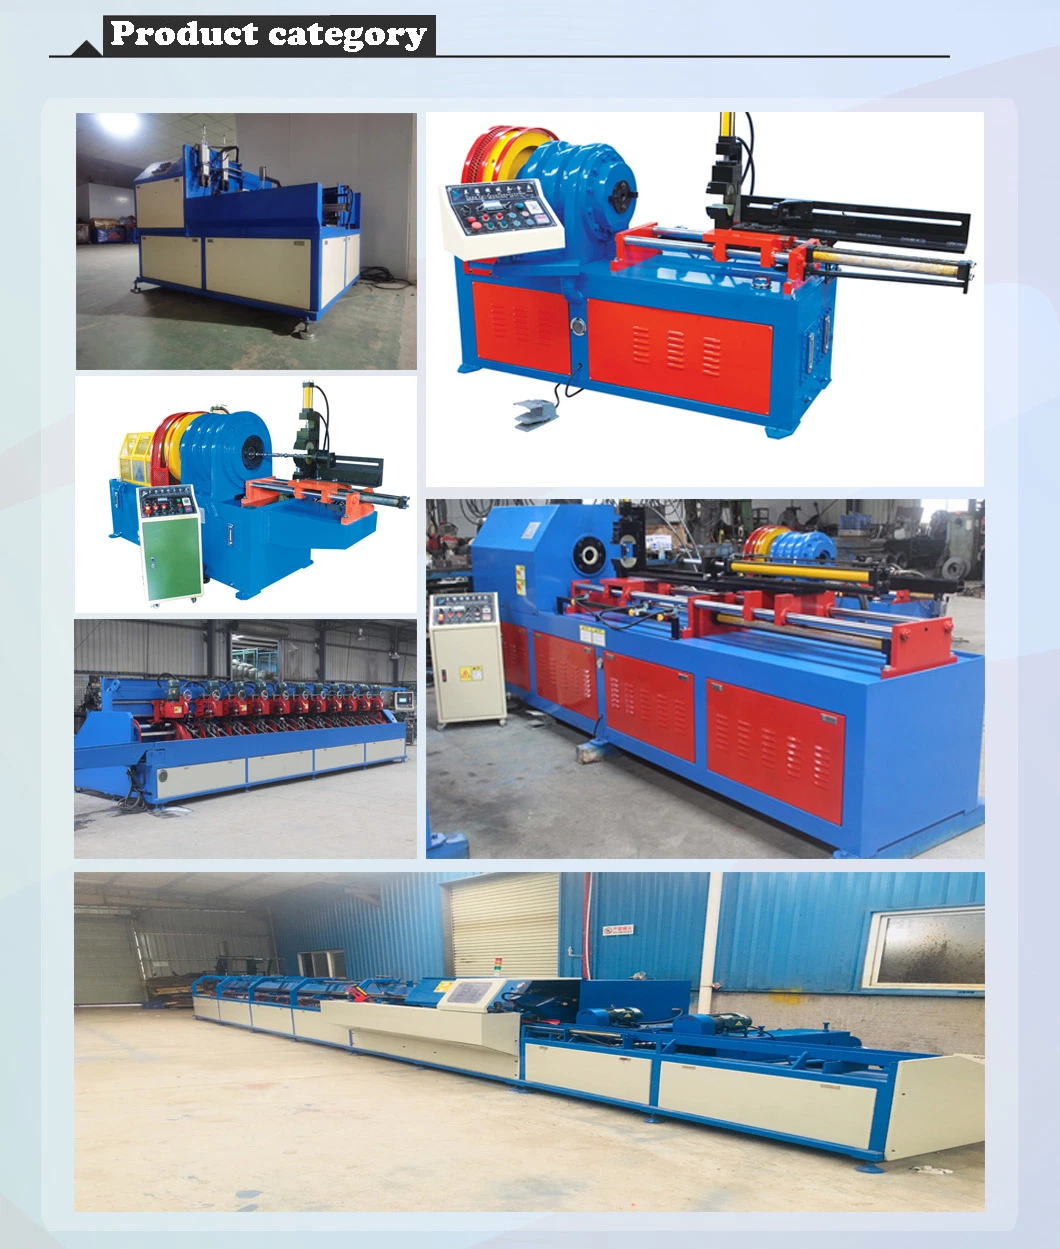 The Manufacturer Sells Fully Automatic Deburring and Pipe Cutting Machines